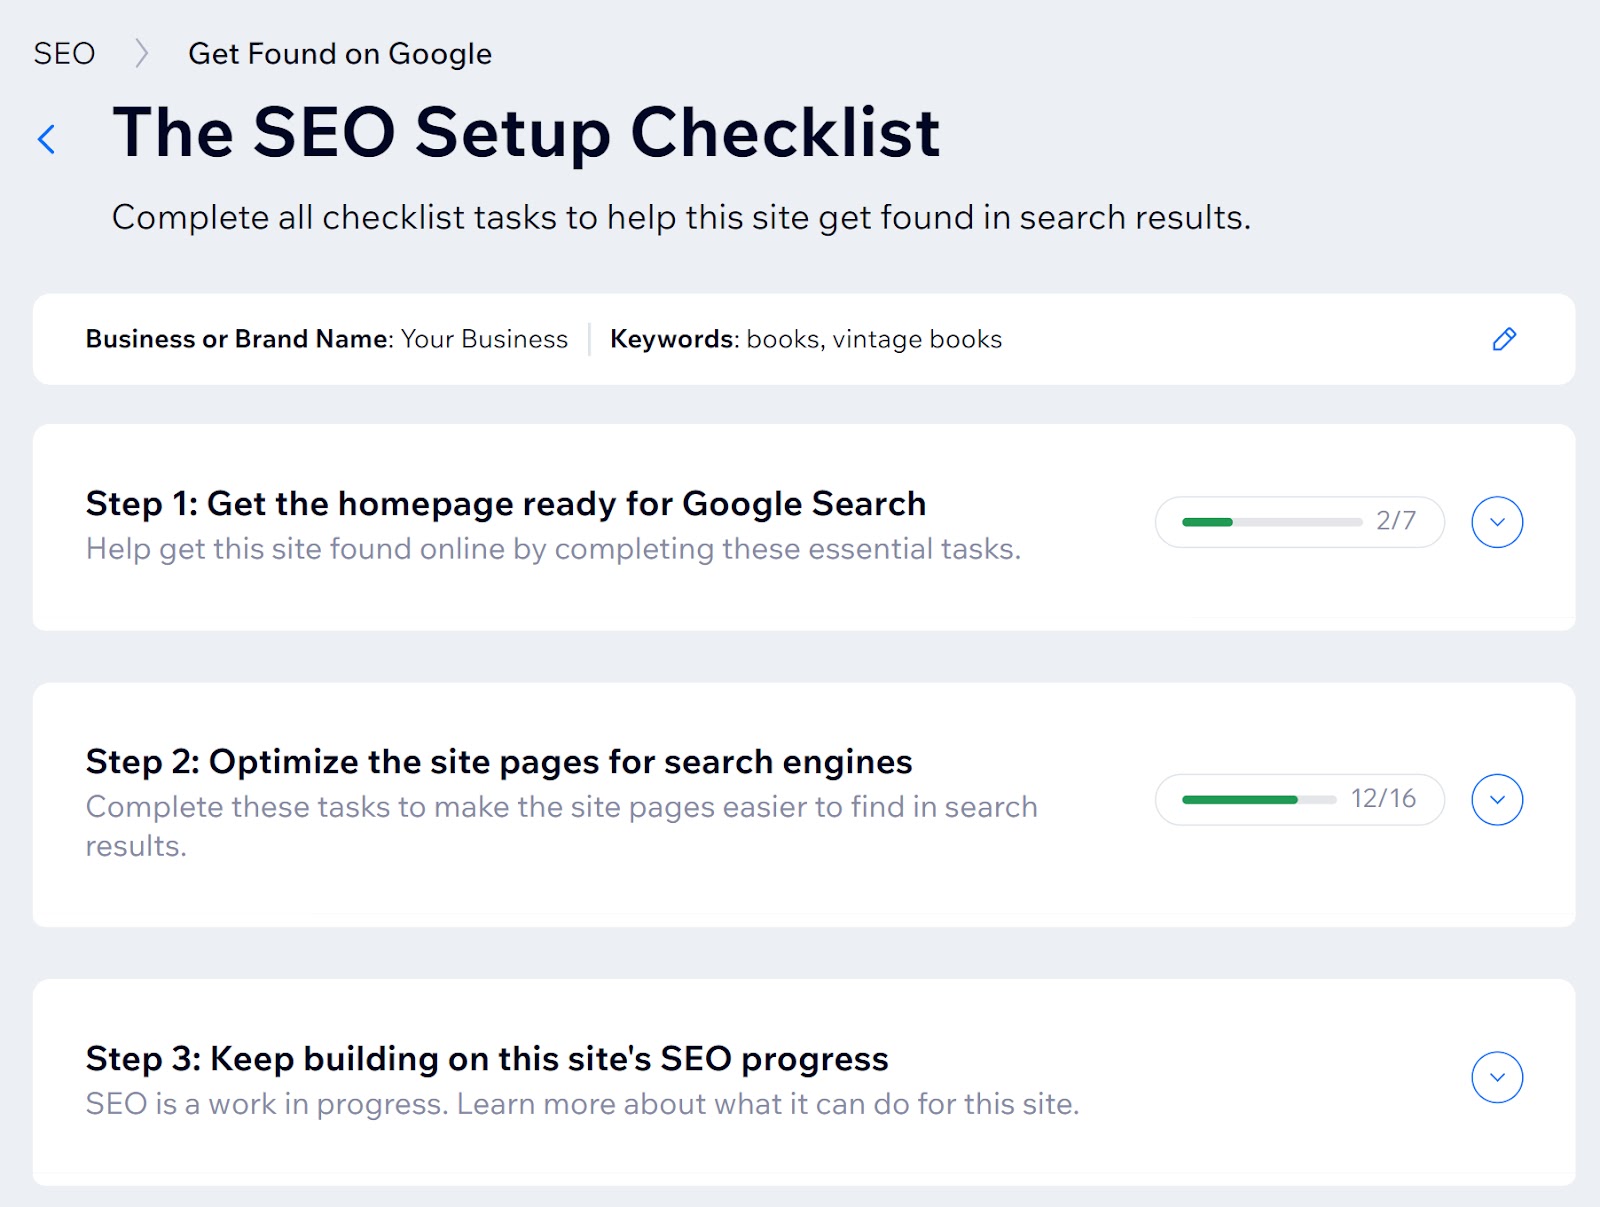 "The SEO Setup Checklist" section in Wix